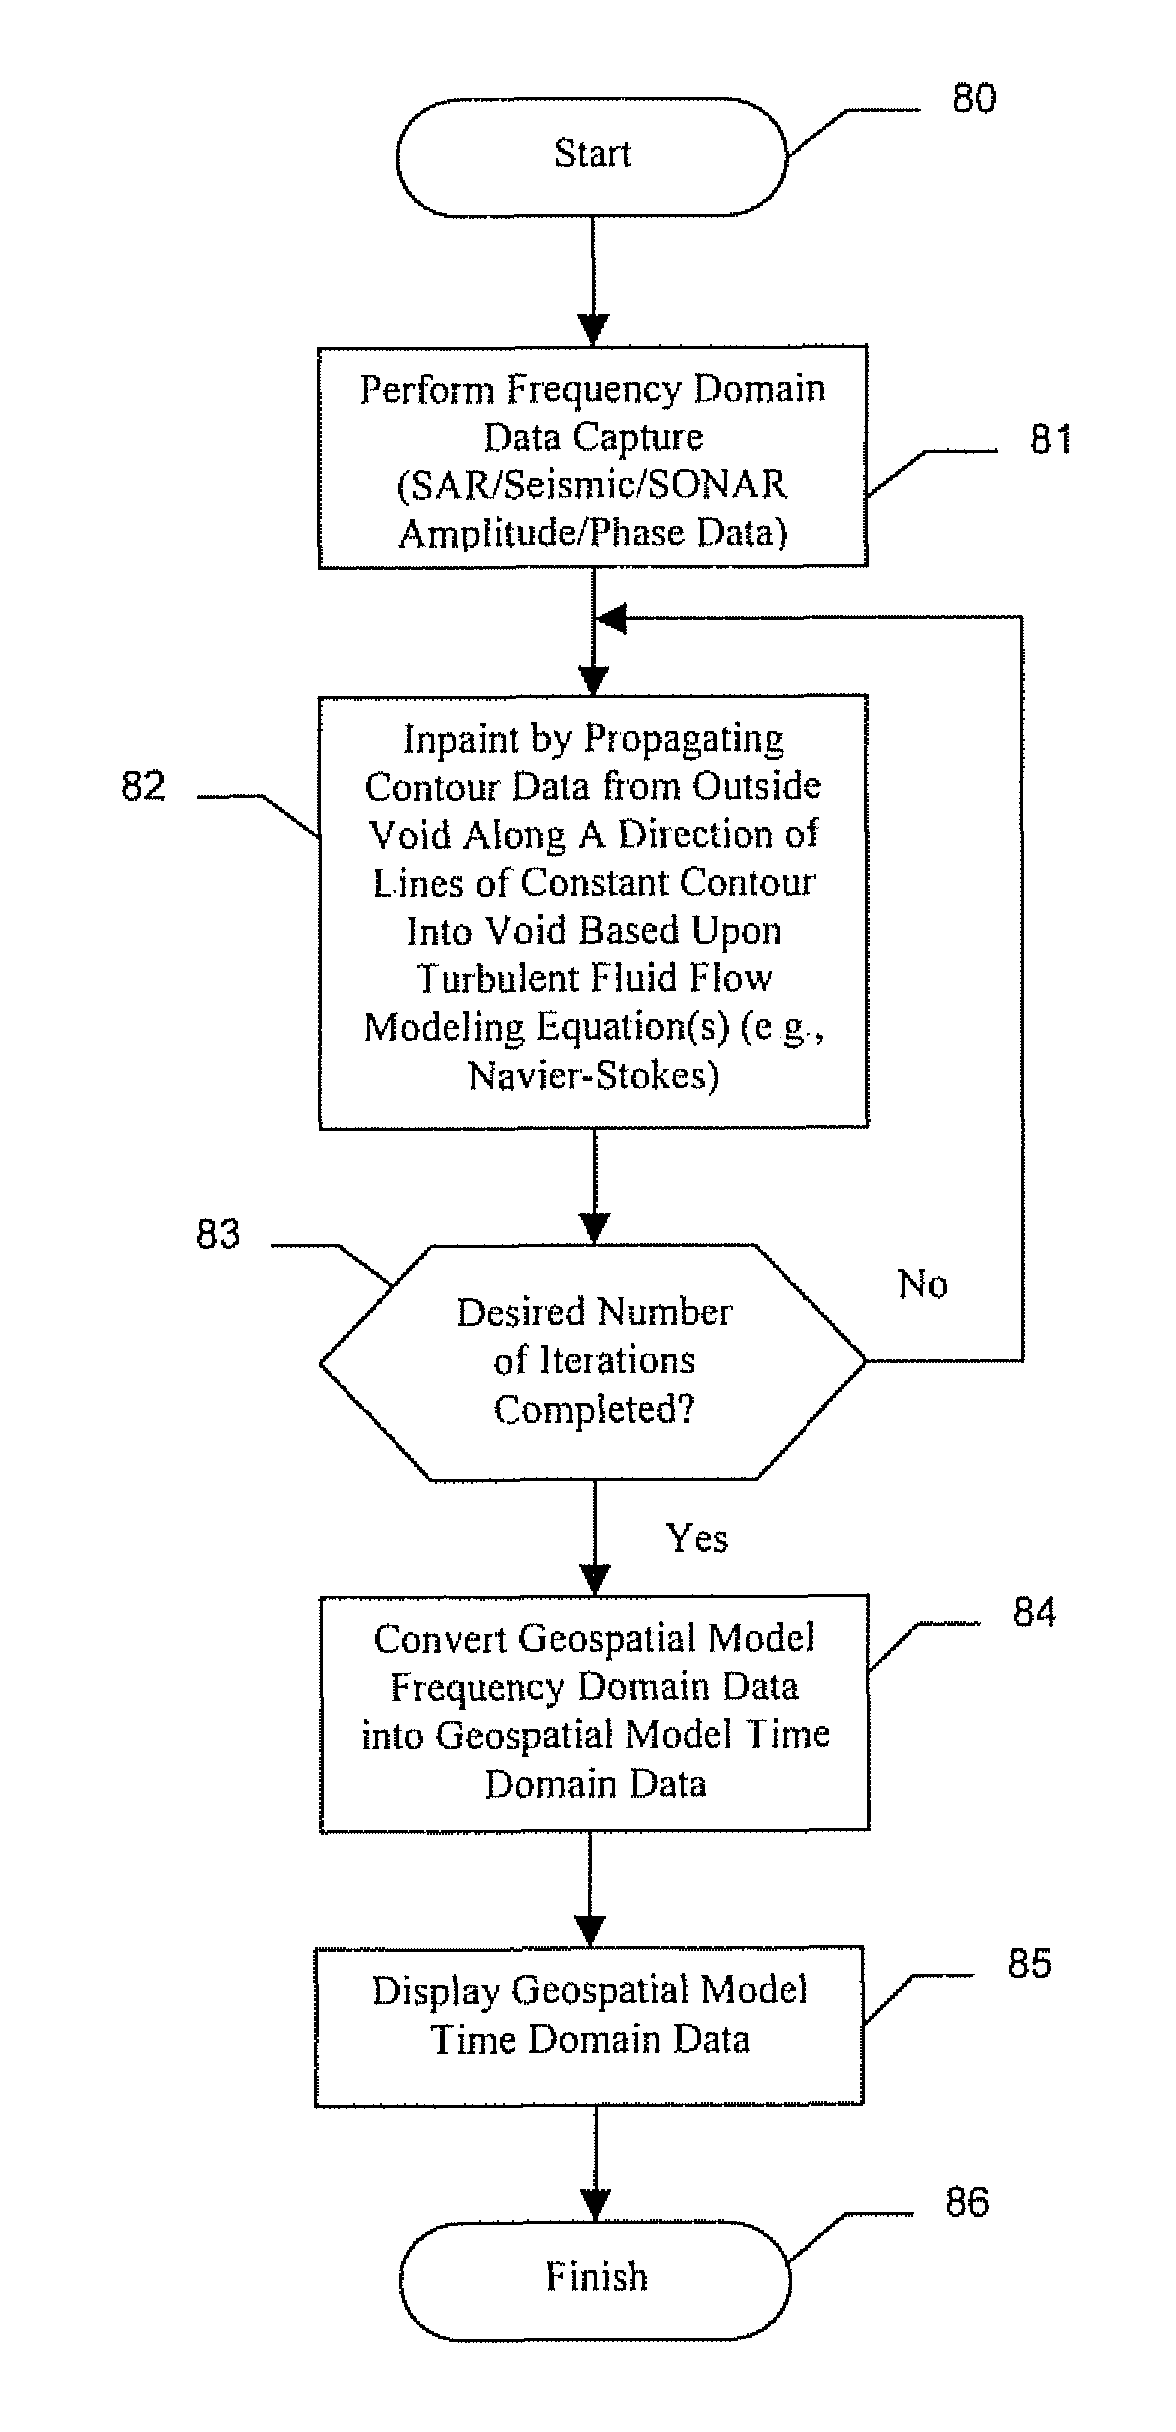 Geospatial modeling system providing non-linear in painting for voids in geospatial model frequency domain data and related methods